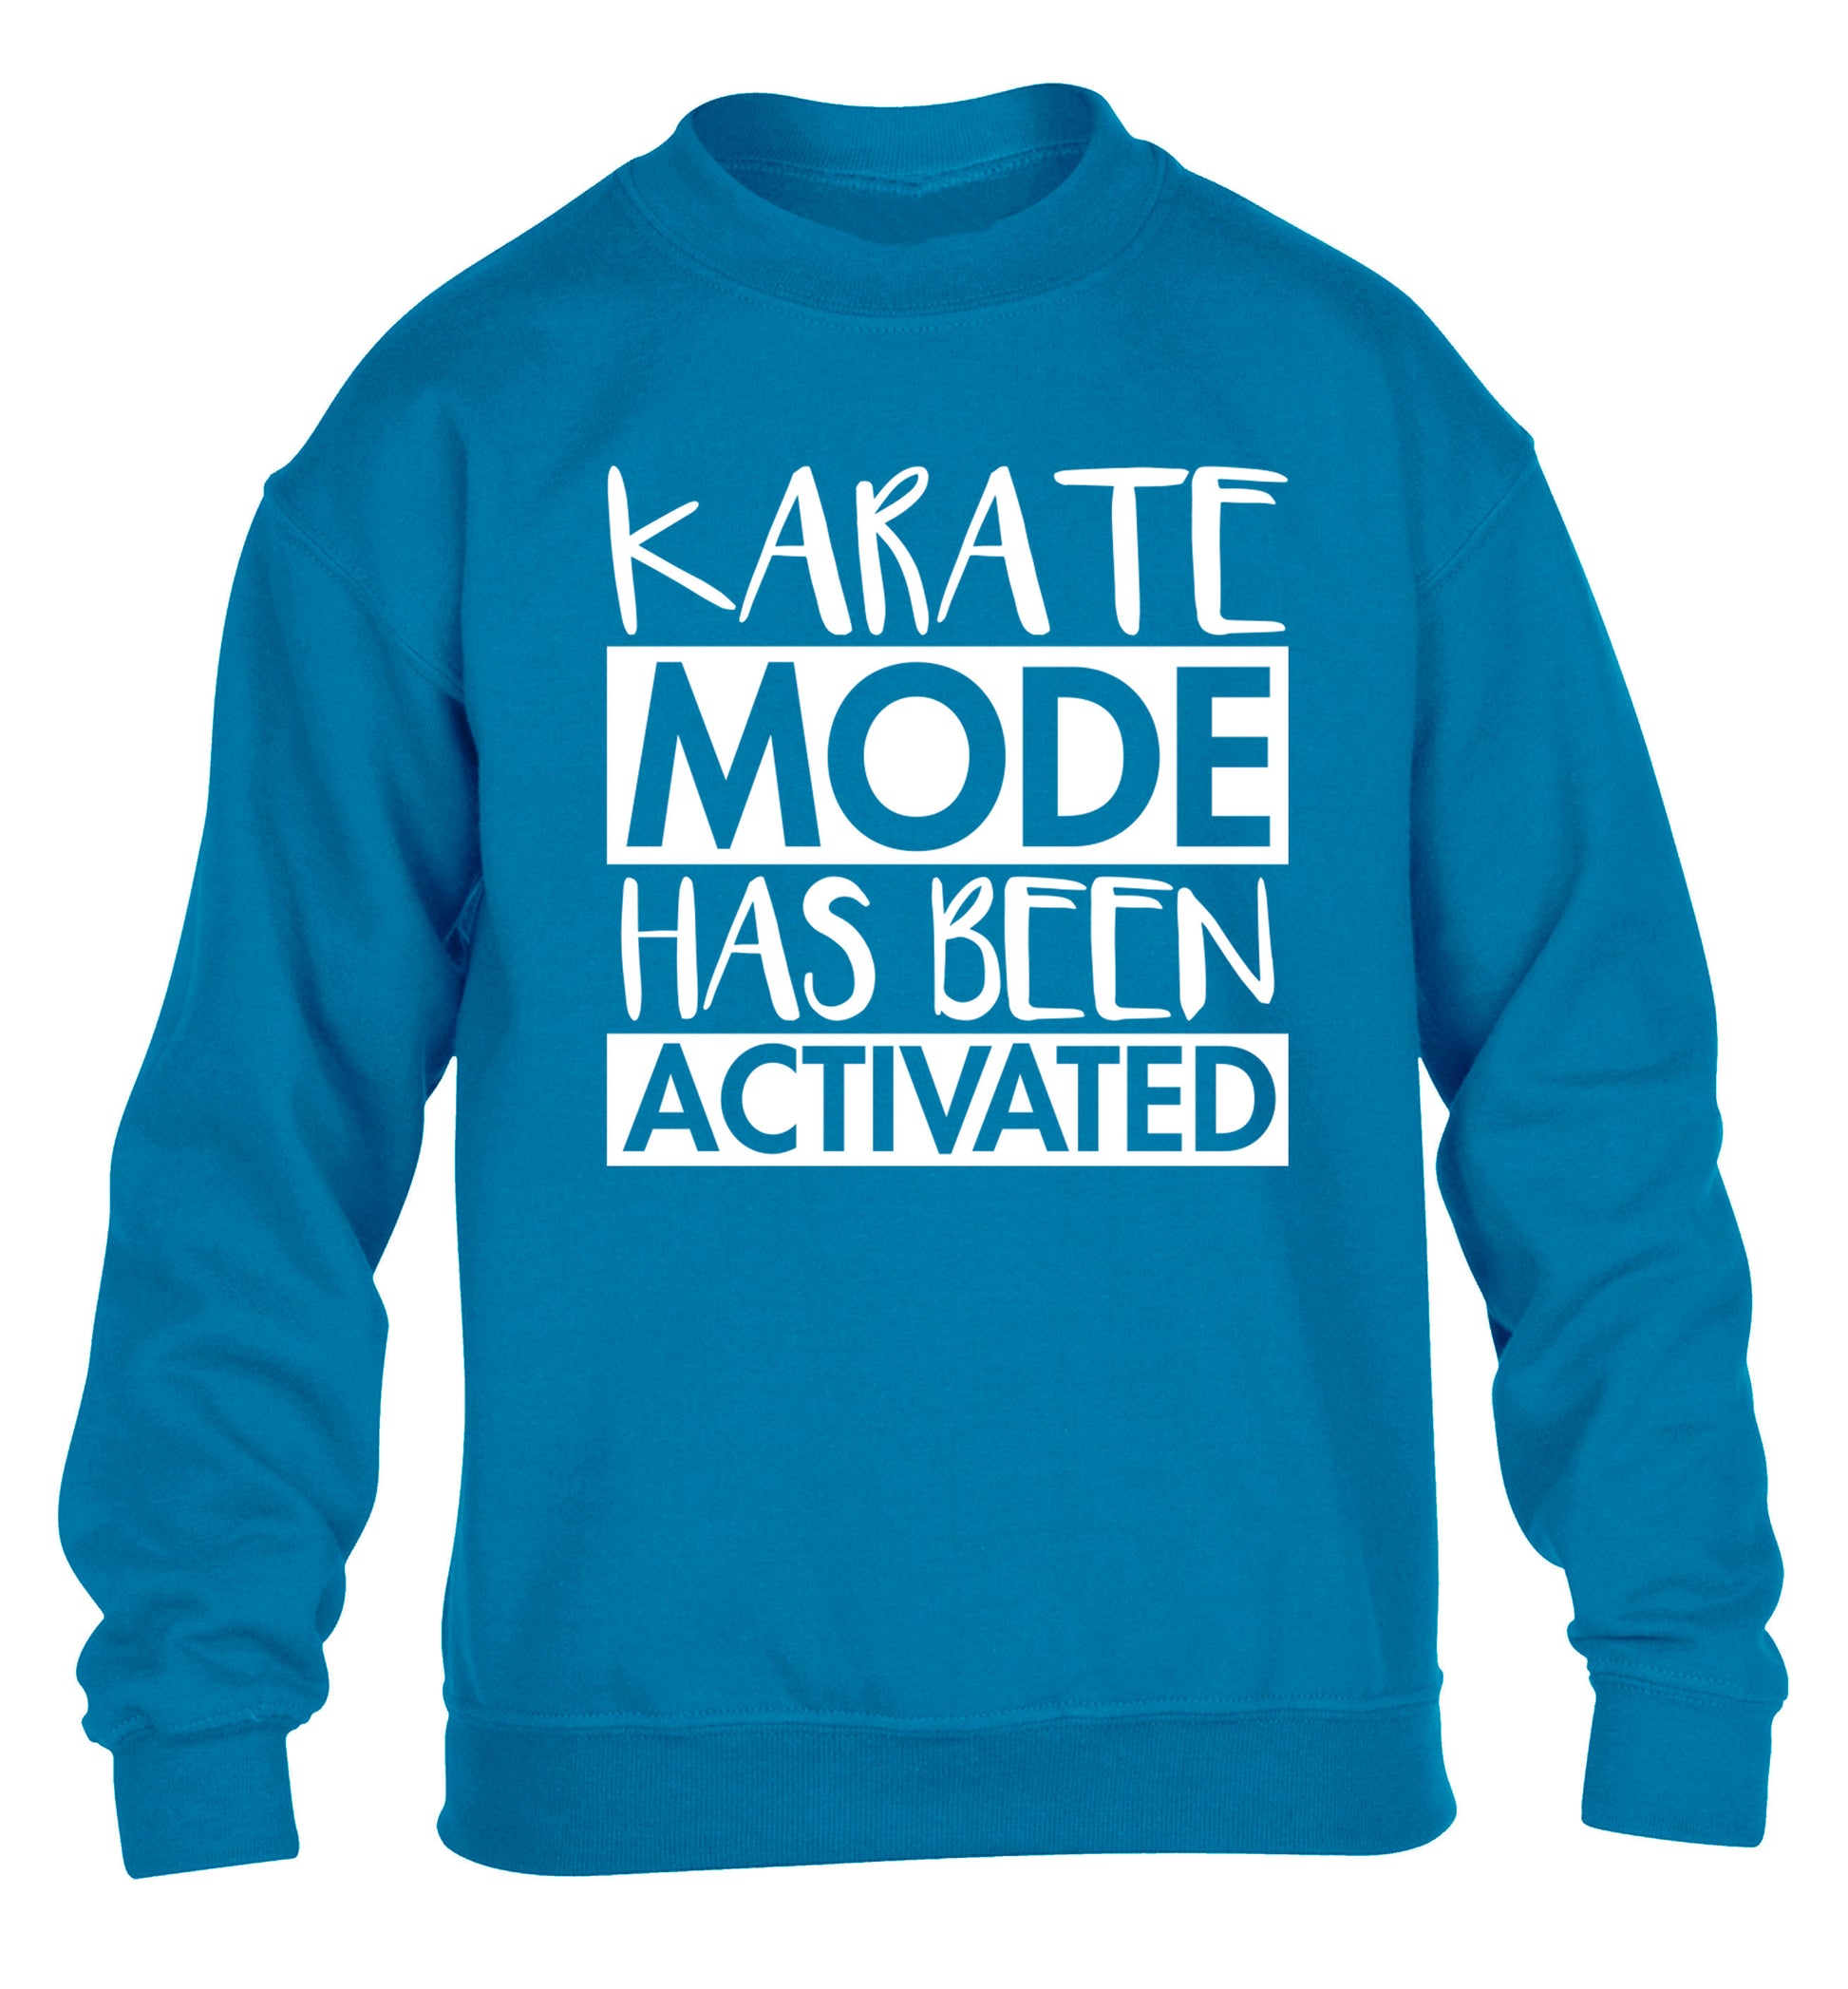 Karate mode activated children's blue sweater 12-14 Years